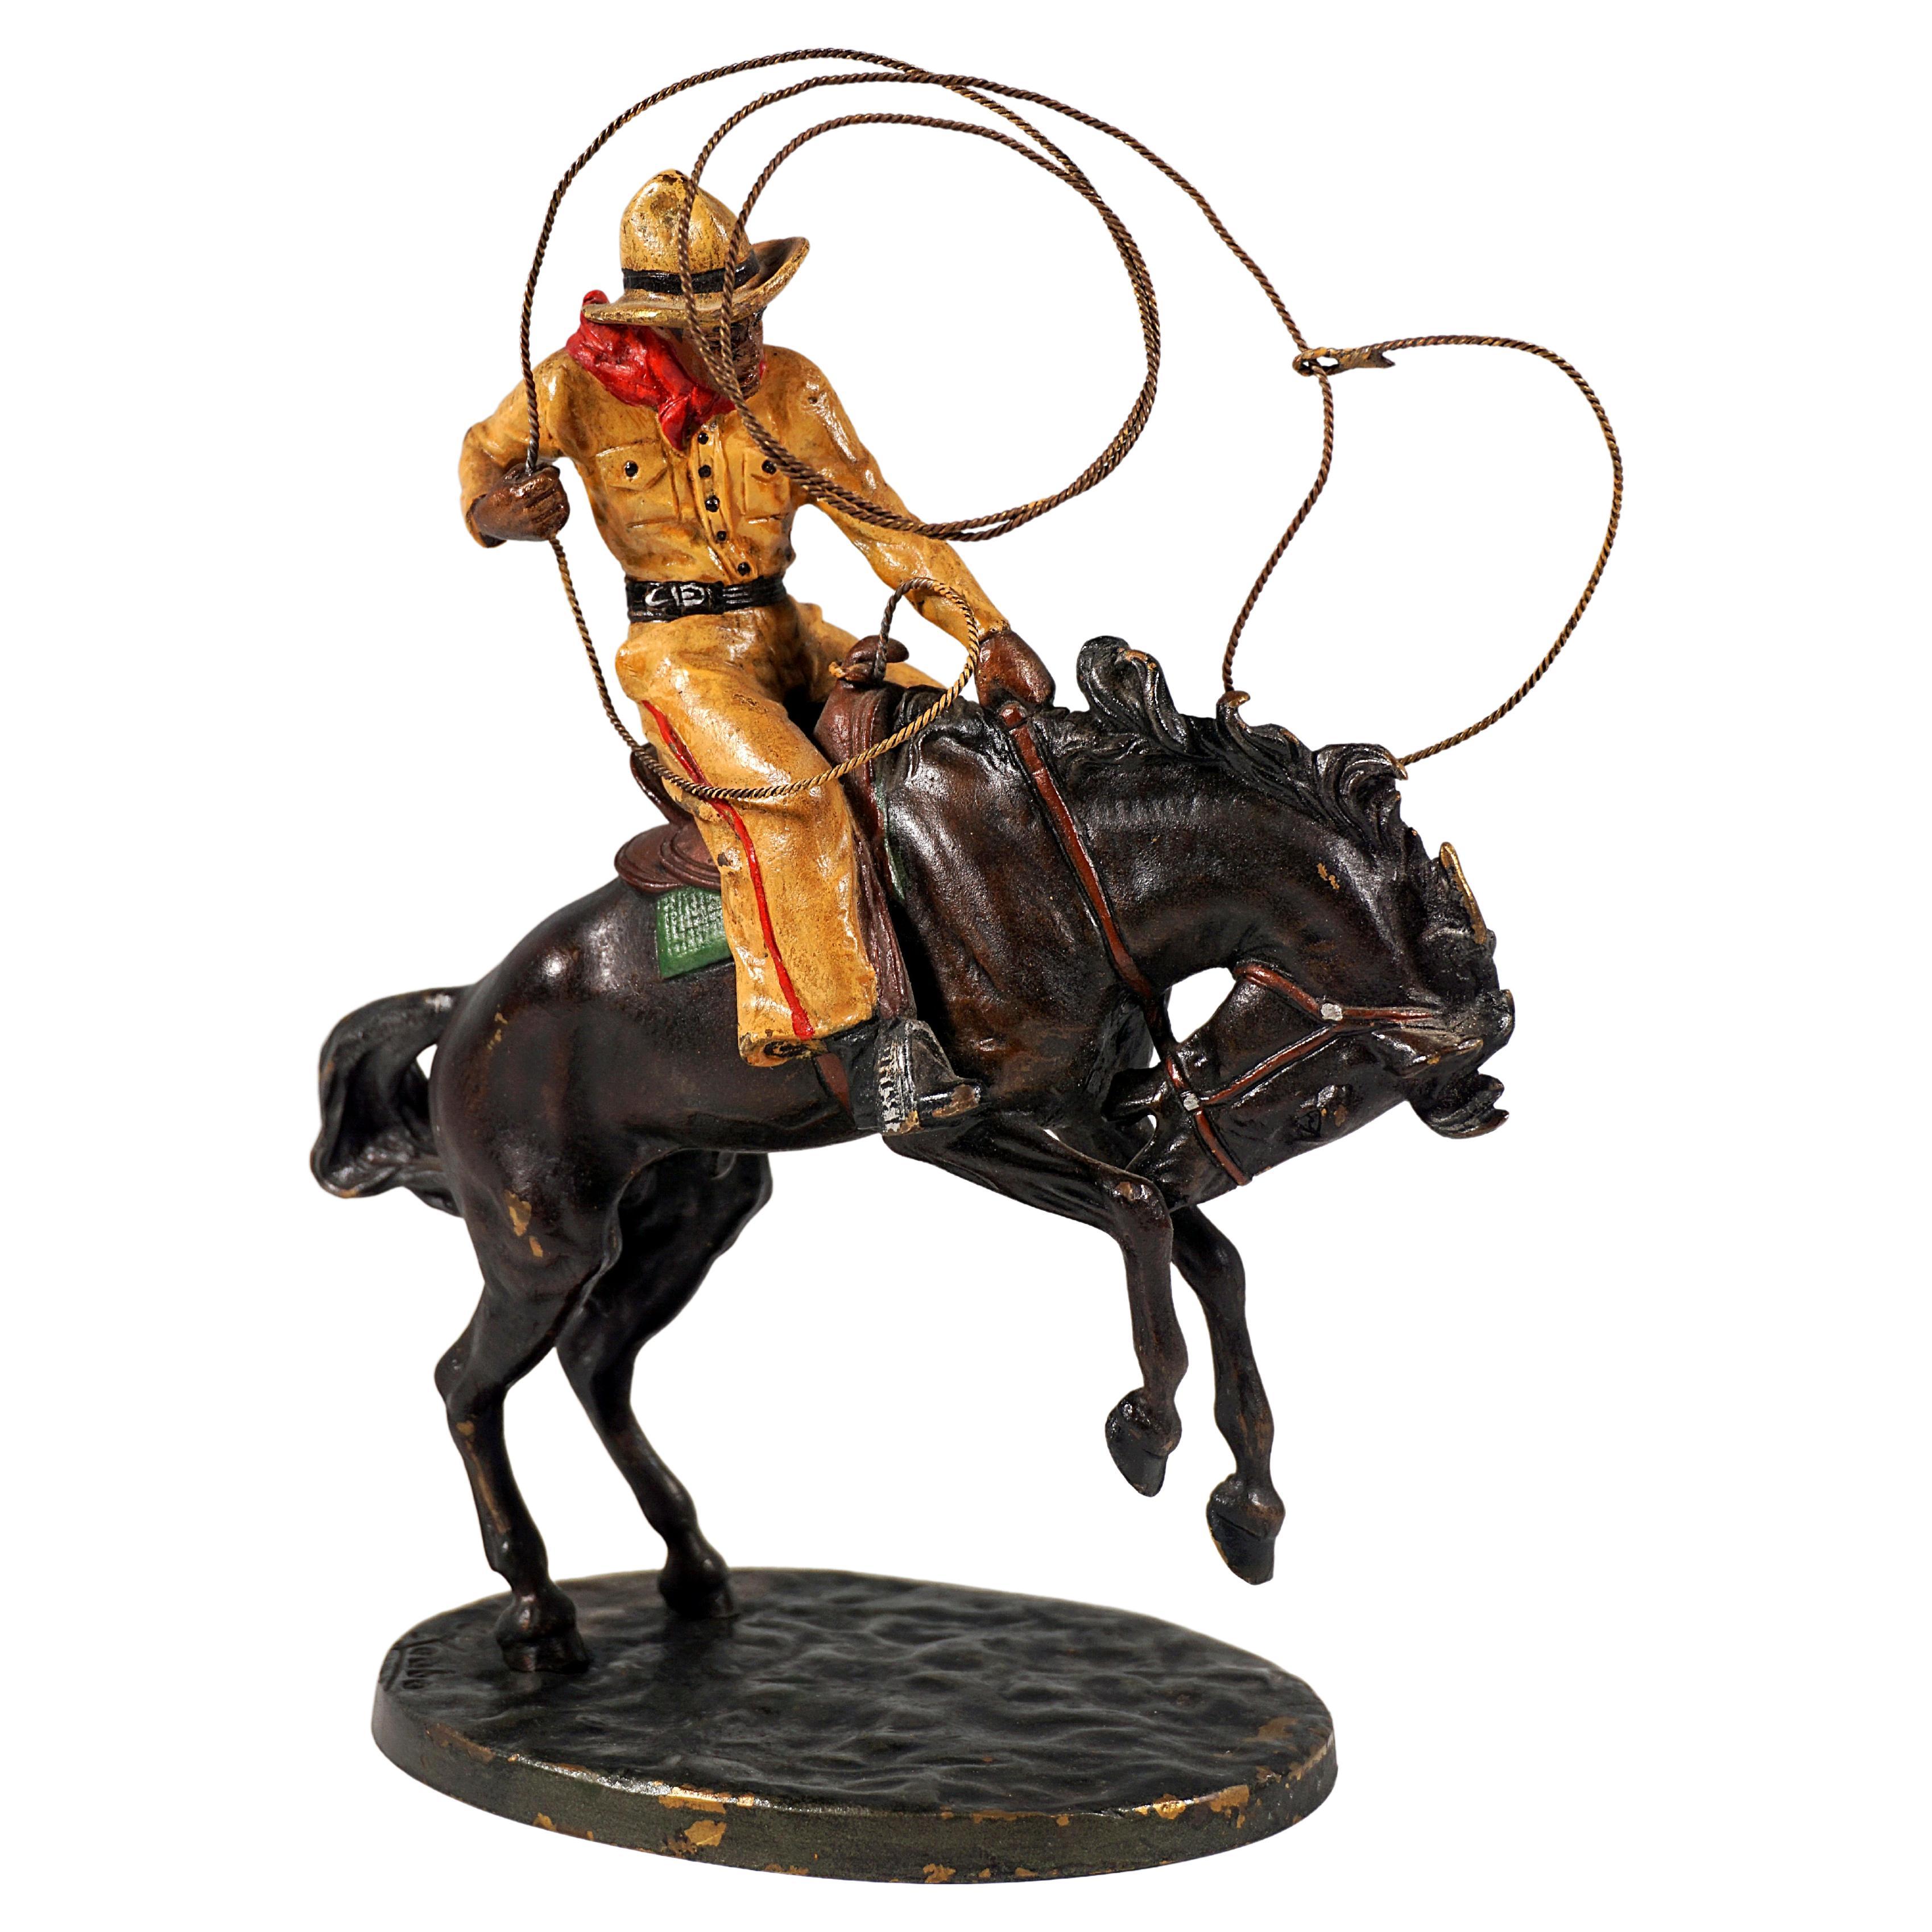 Cowboy with Lasso on Horse, Viennese Bronze Figure by Carl Kauba, Around 1920 For Sale